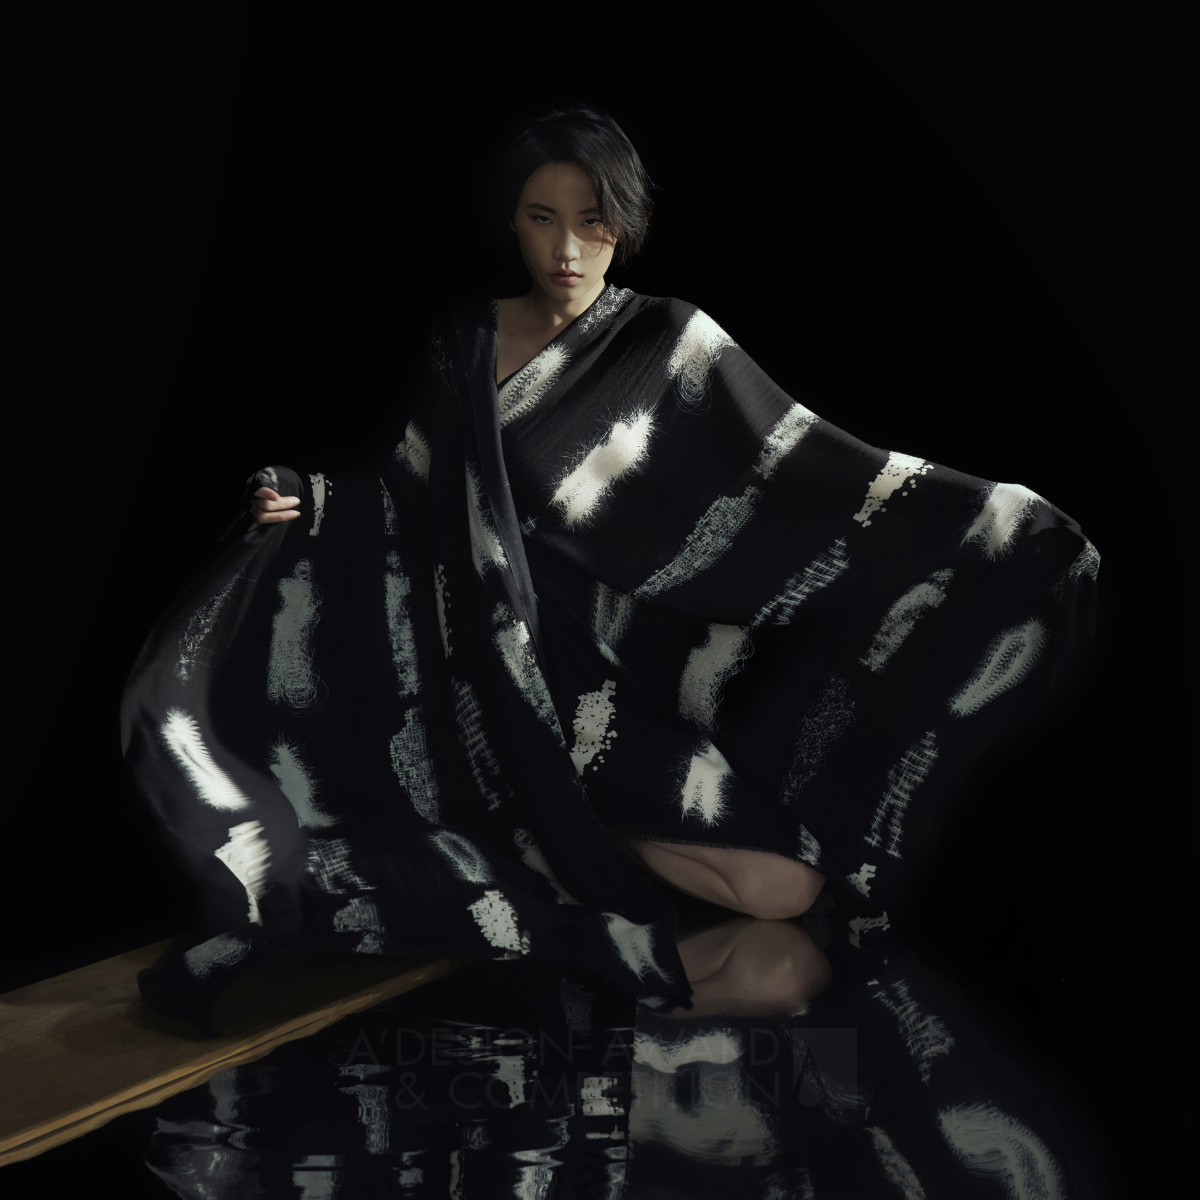 2023 Revive Collection Wool Scarf by Yen-Ting Cho Silver Textile, Fabric, Textures, Patterns and Cloth Design Award Winner 2023 